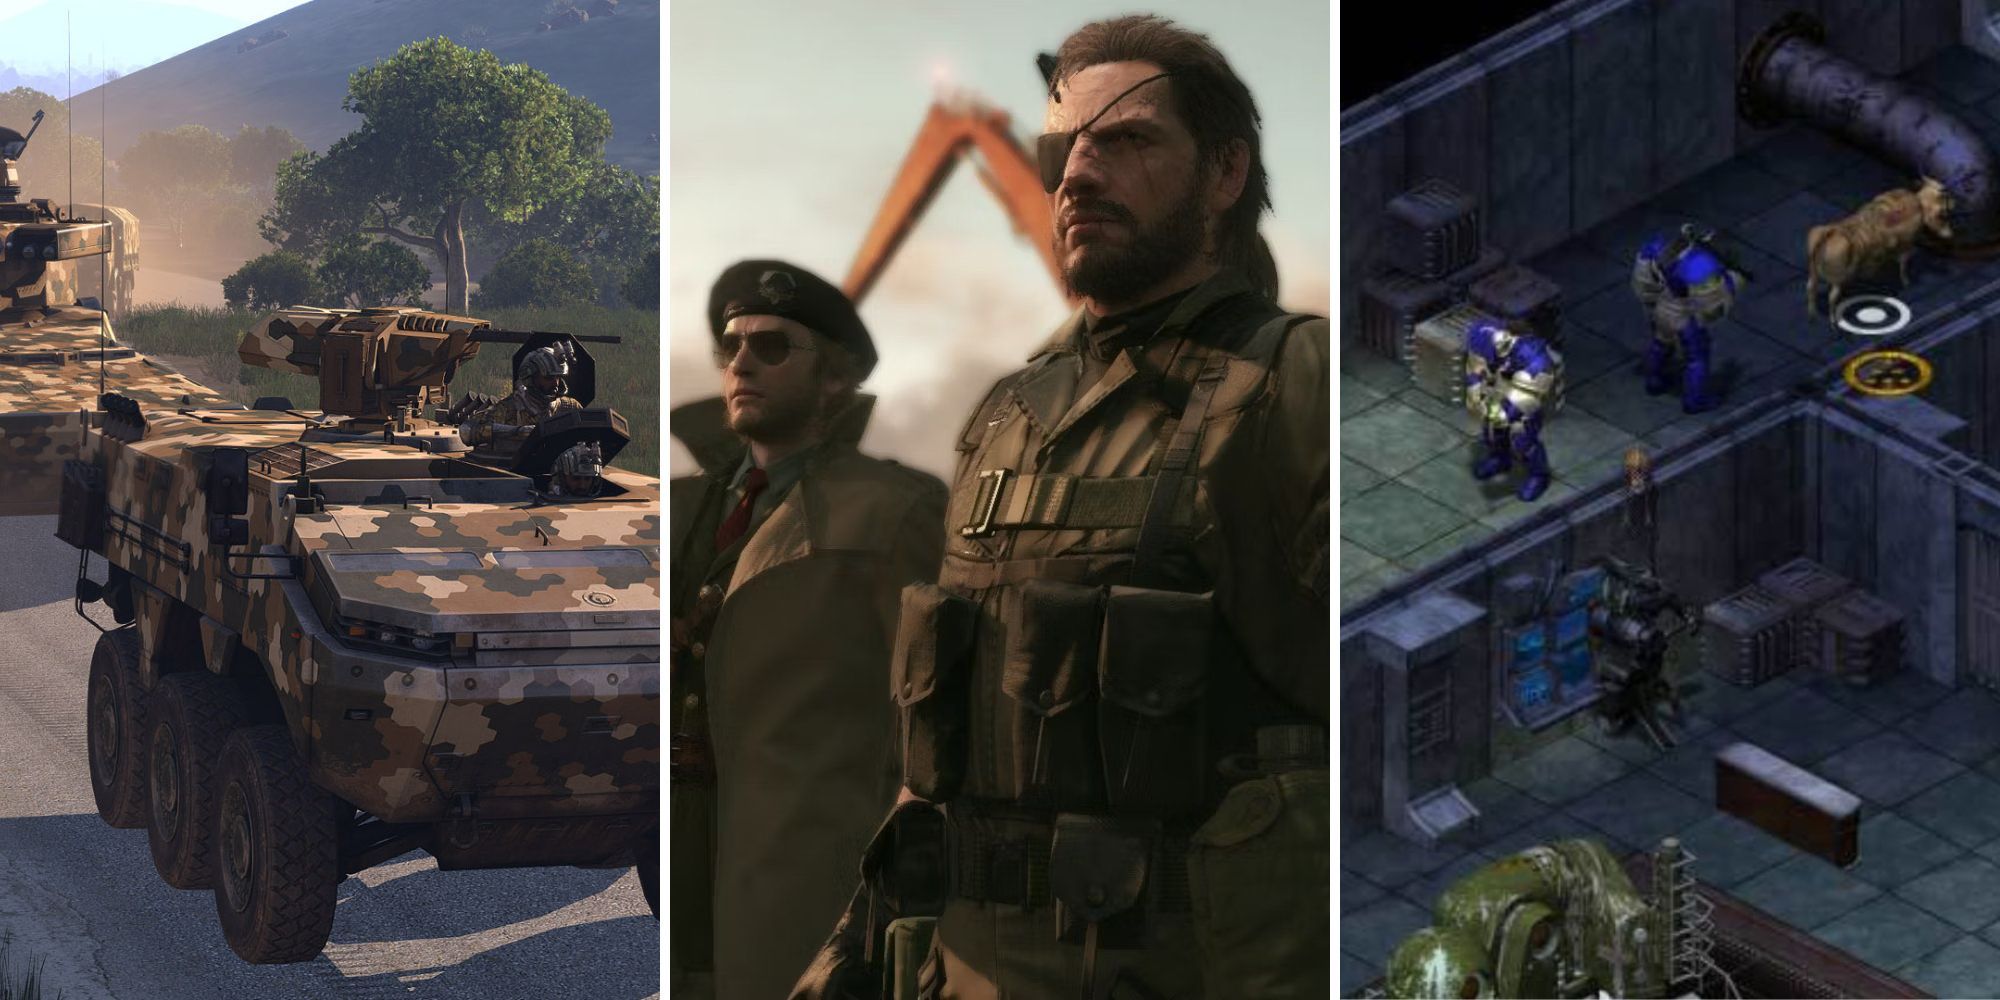 A grid showing the three games Arma 3, Metal Gear Solid 5: Phantom Pain, and Fallout Tactics: Brotherhood of Steel